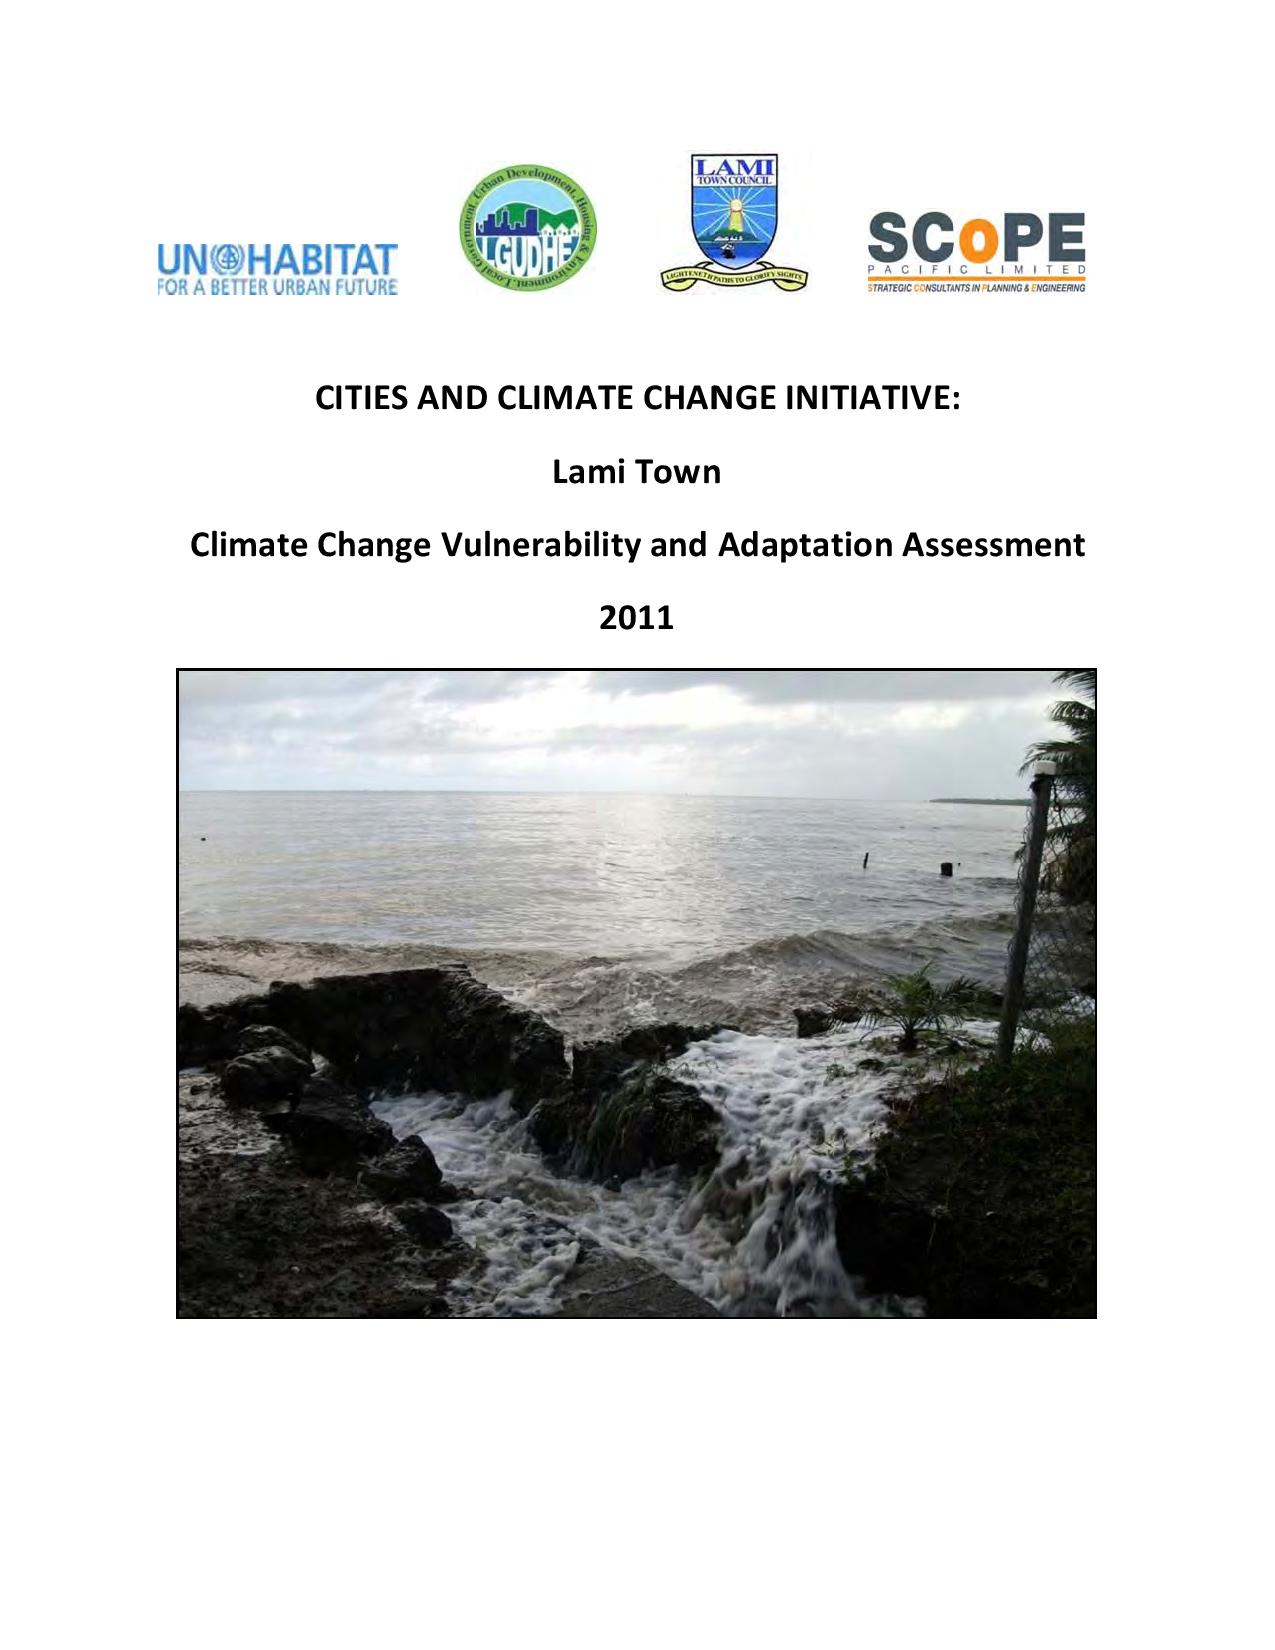 Lami Town Cities and Climate Change Initiative Vulnerability and Adaptation Assessment (2011) – CCCI